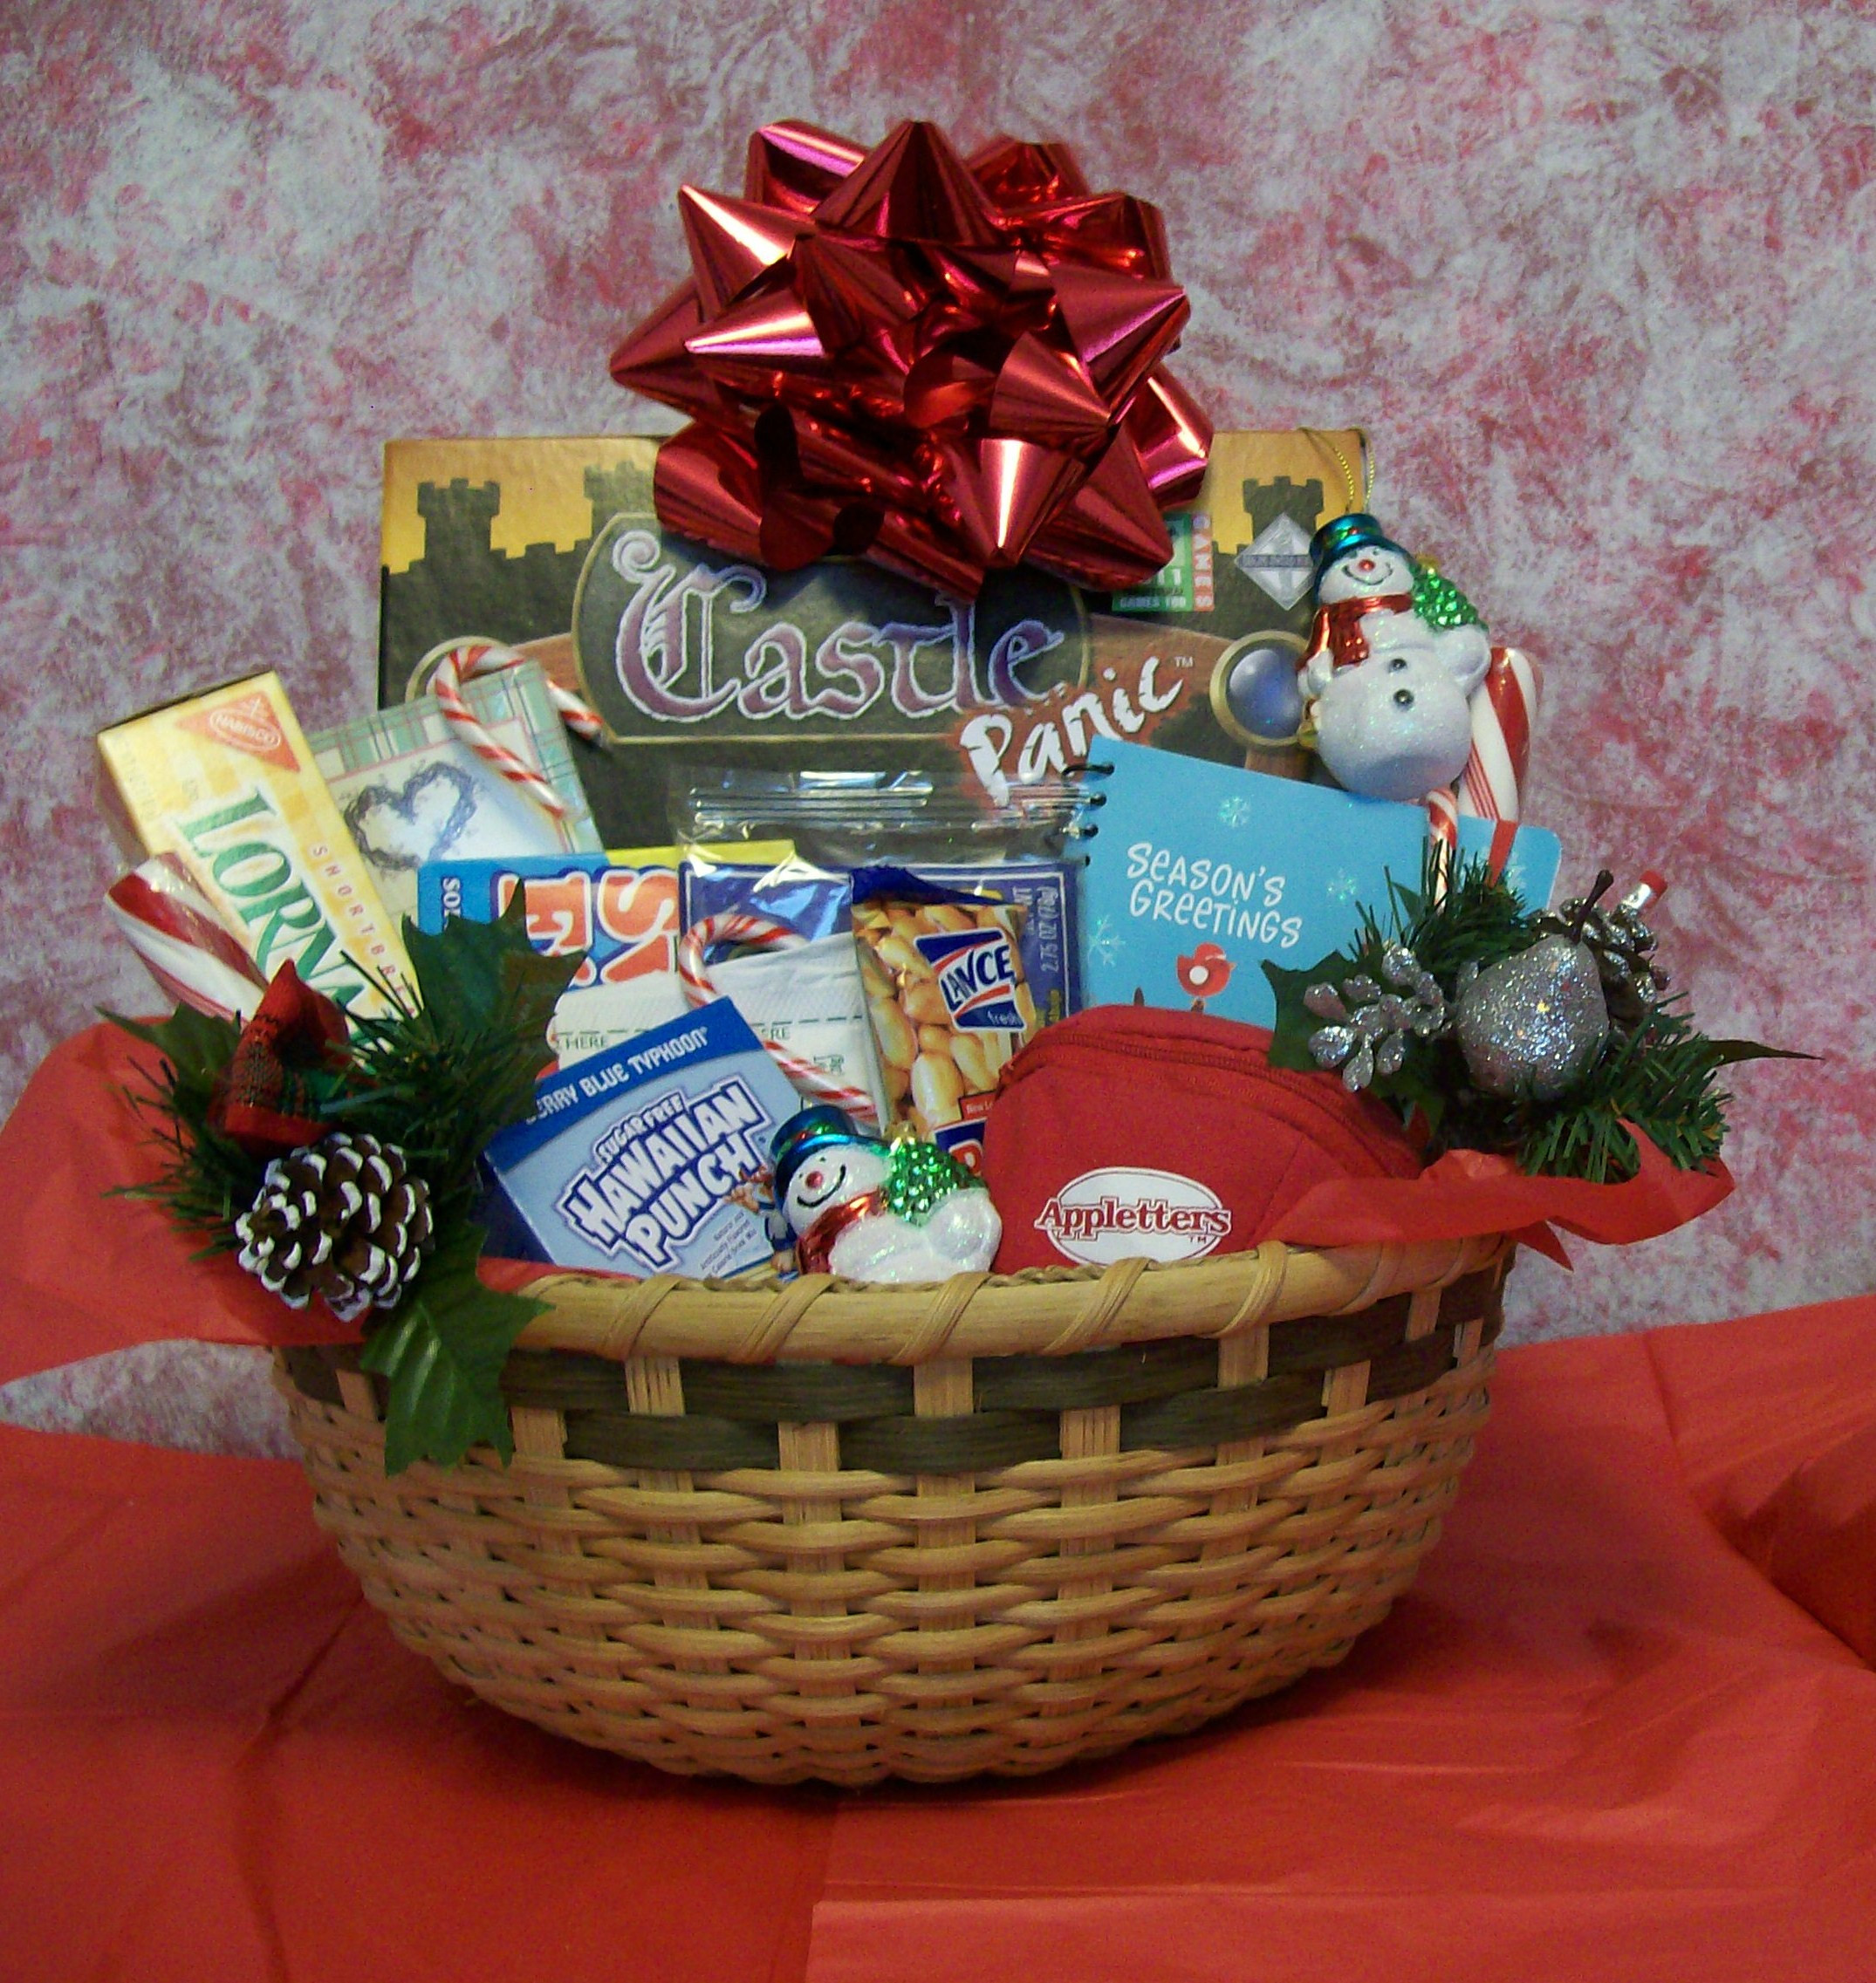 Family Fun Gift Basket Ideas
 Create a Christmas Fun and Games Gift Basket for a Family